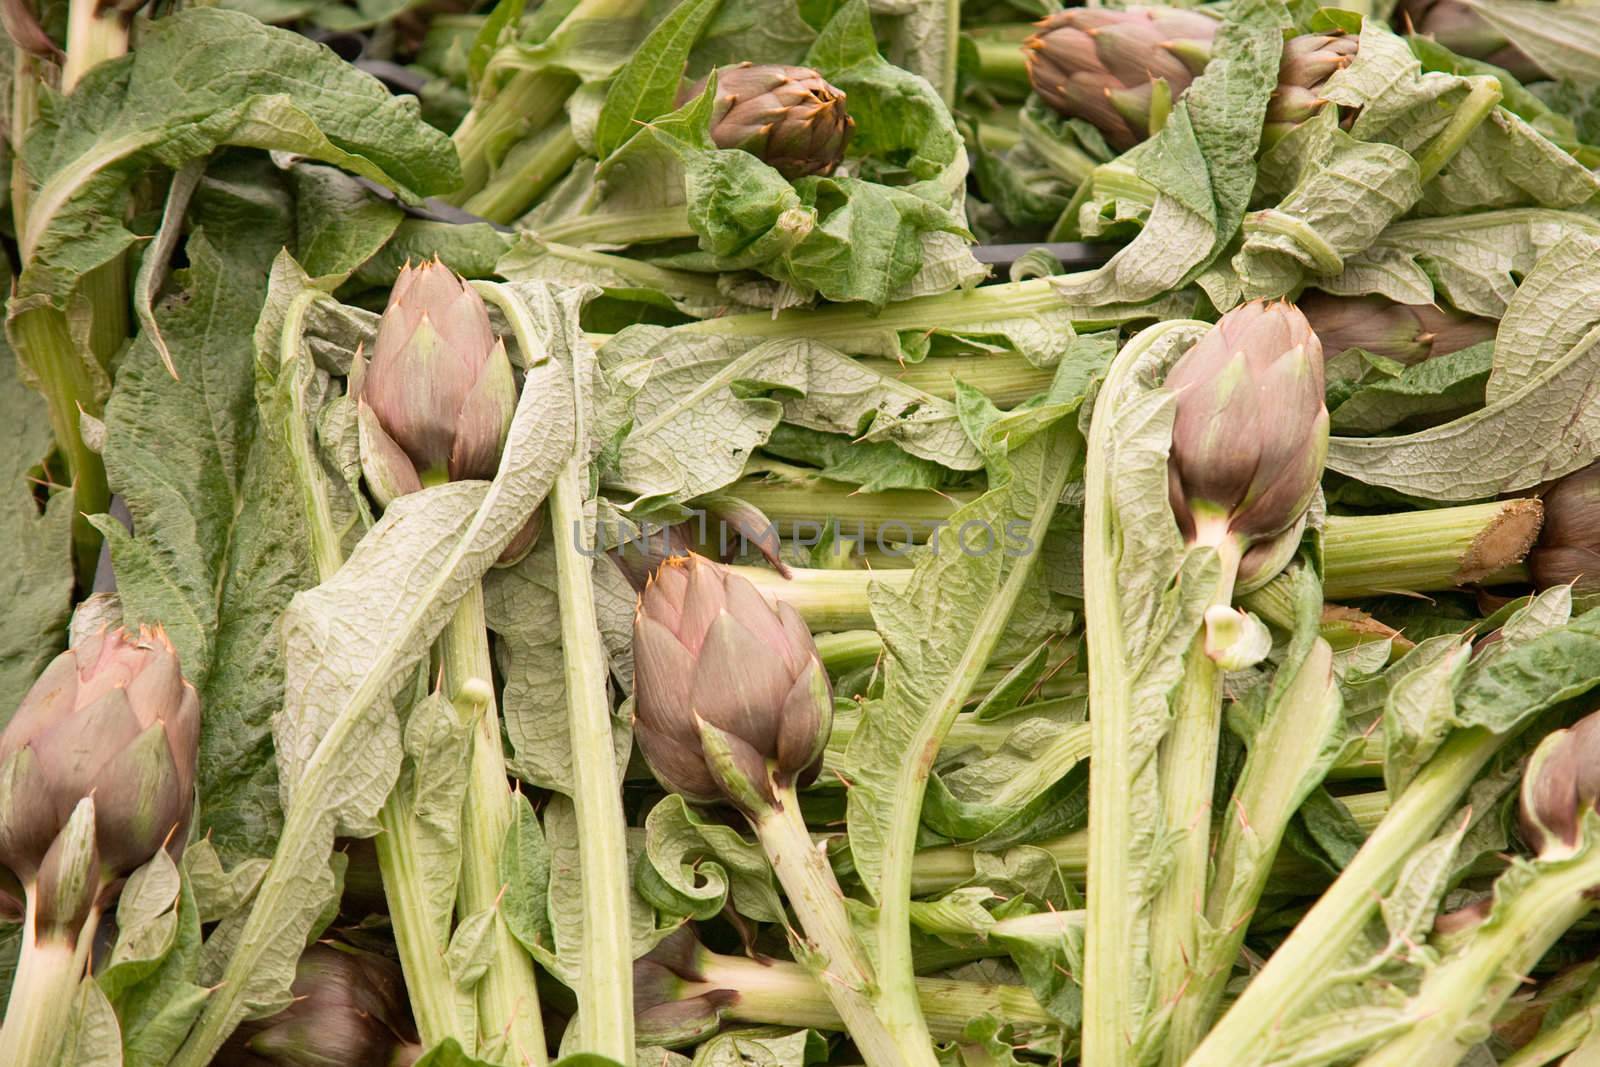 Group of fresh artichokes on a market stall.